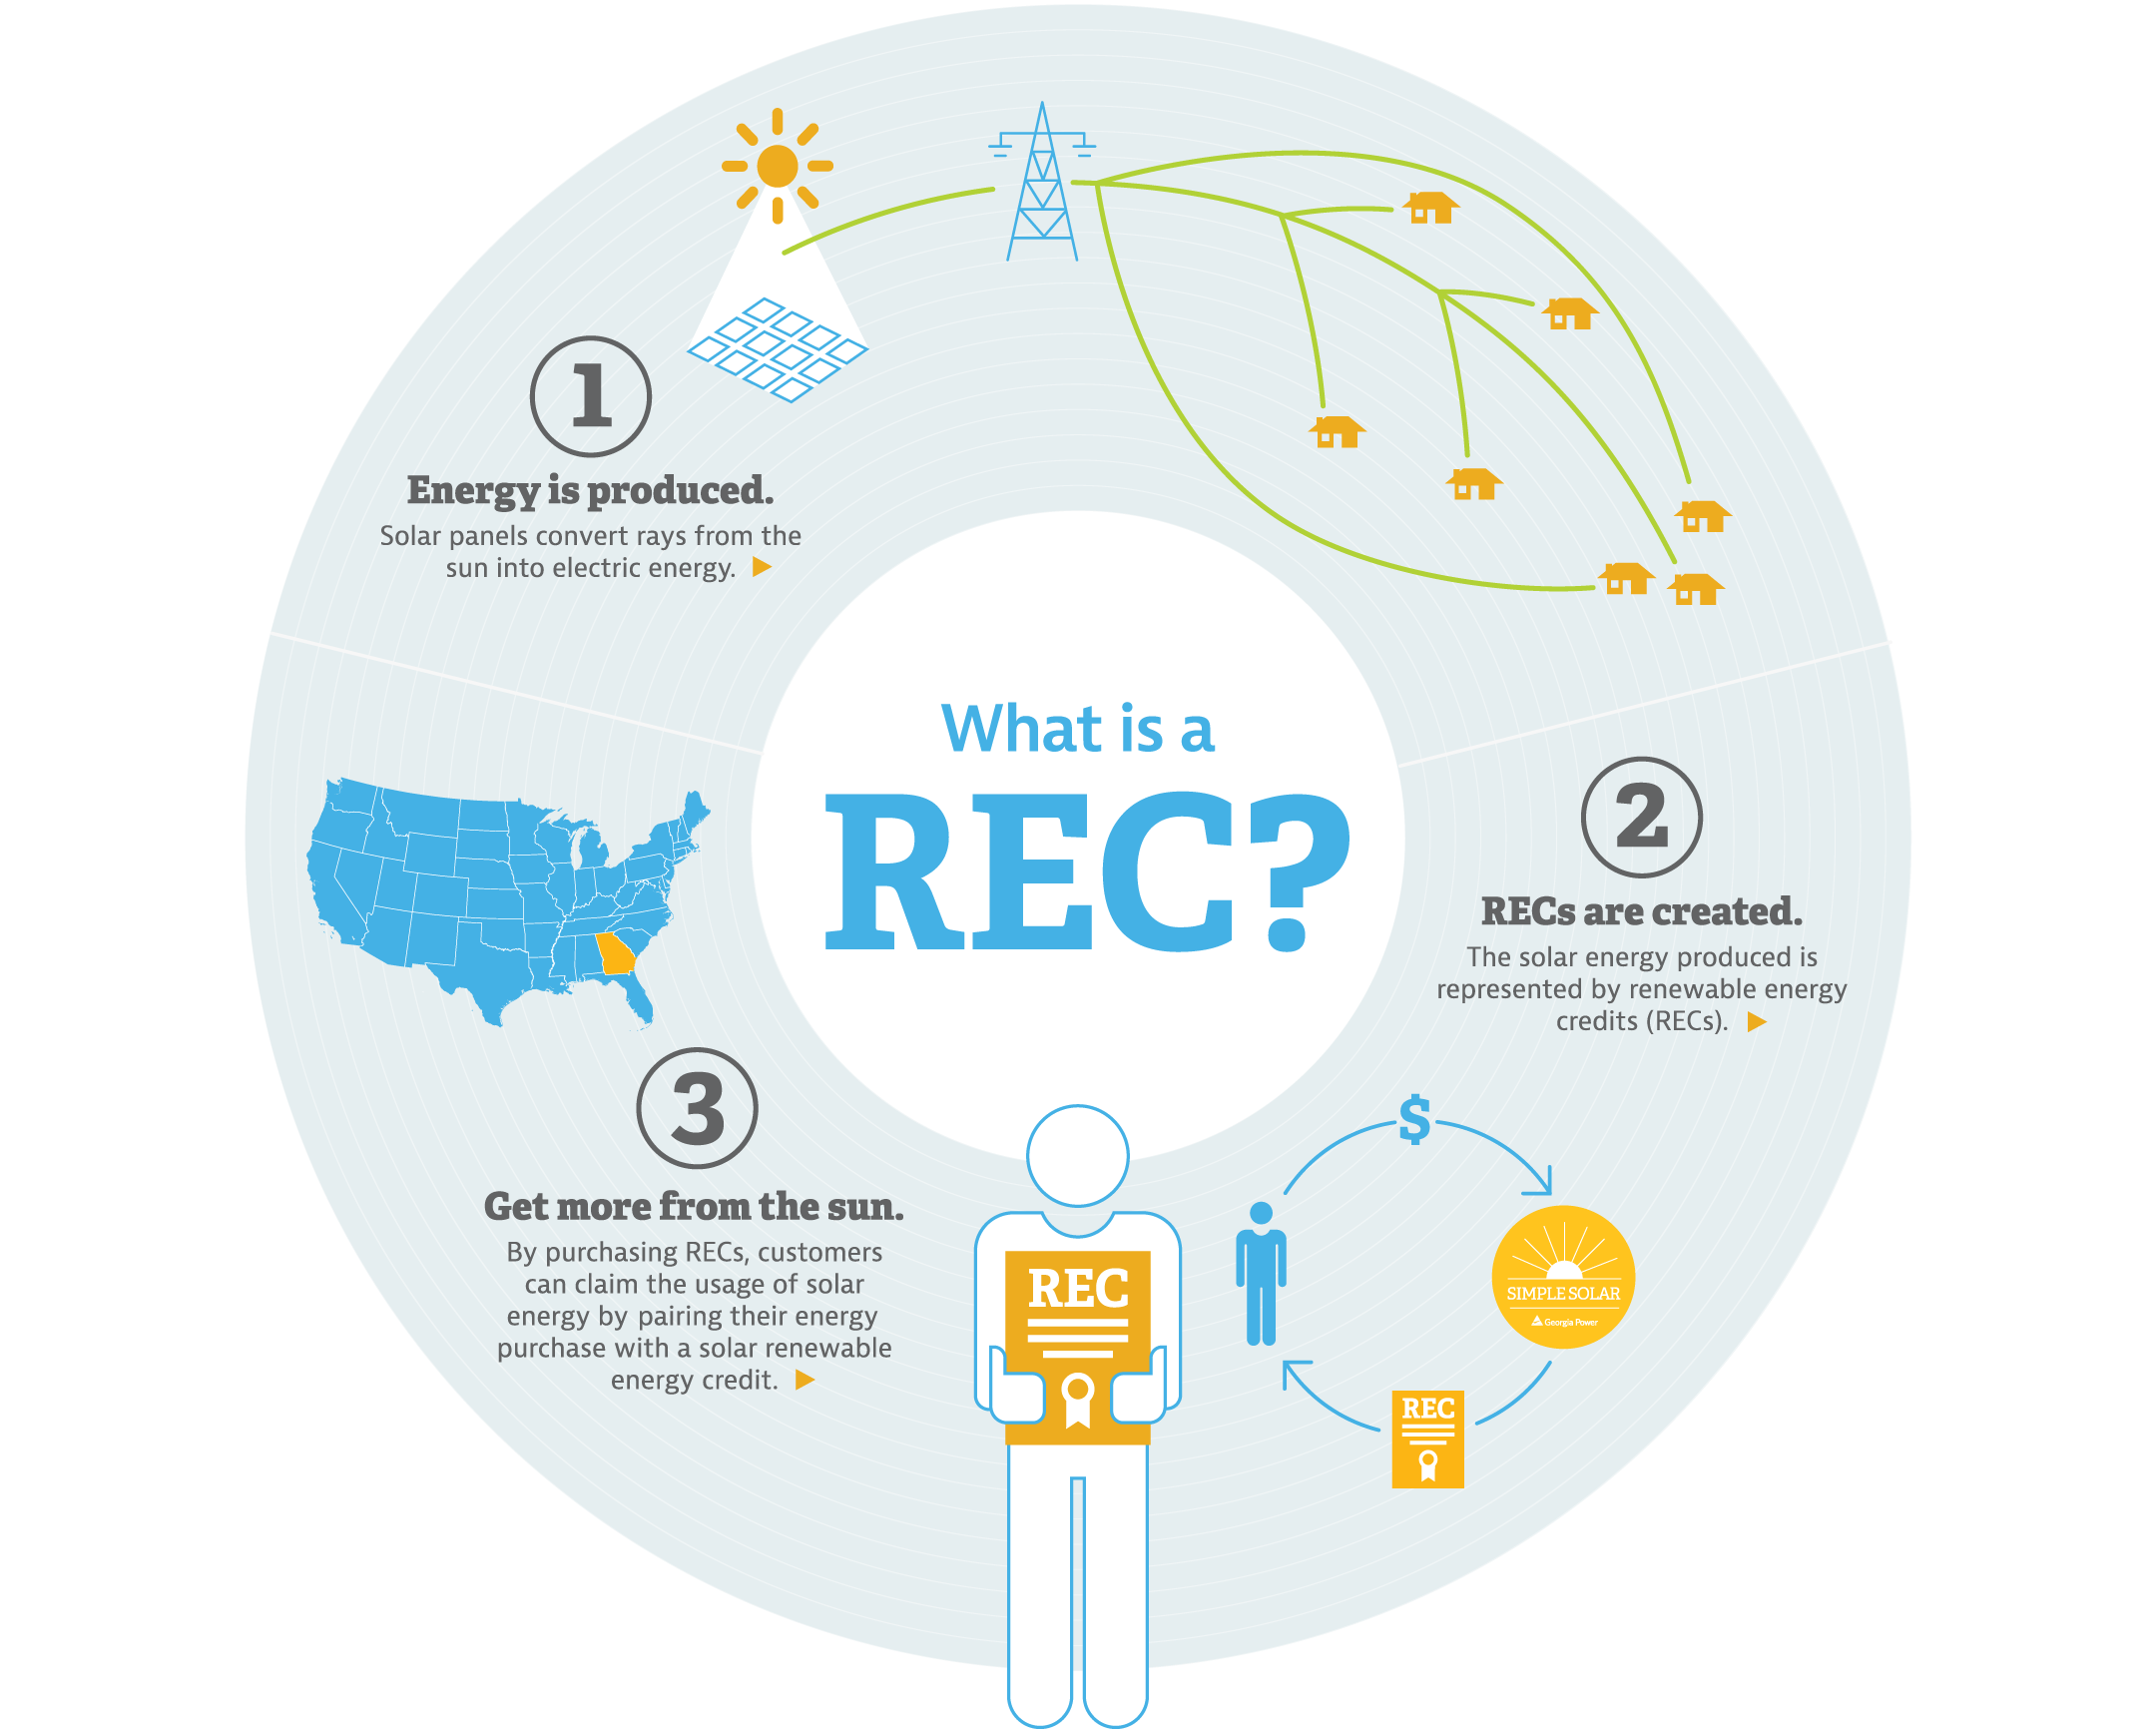 What is a REC?